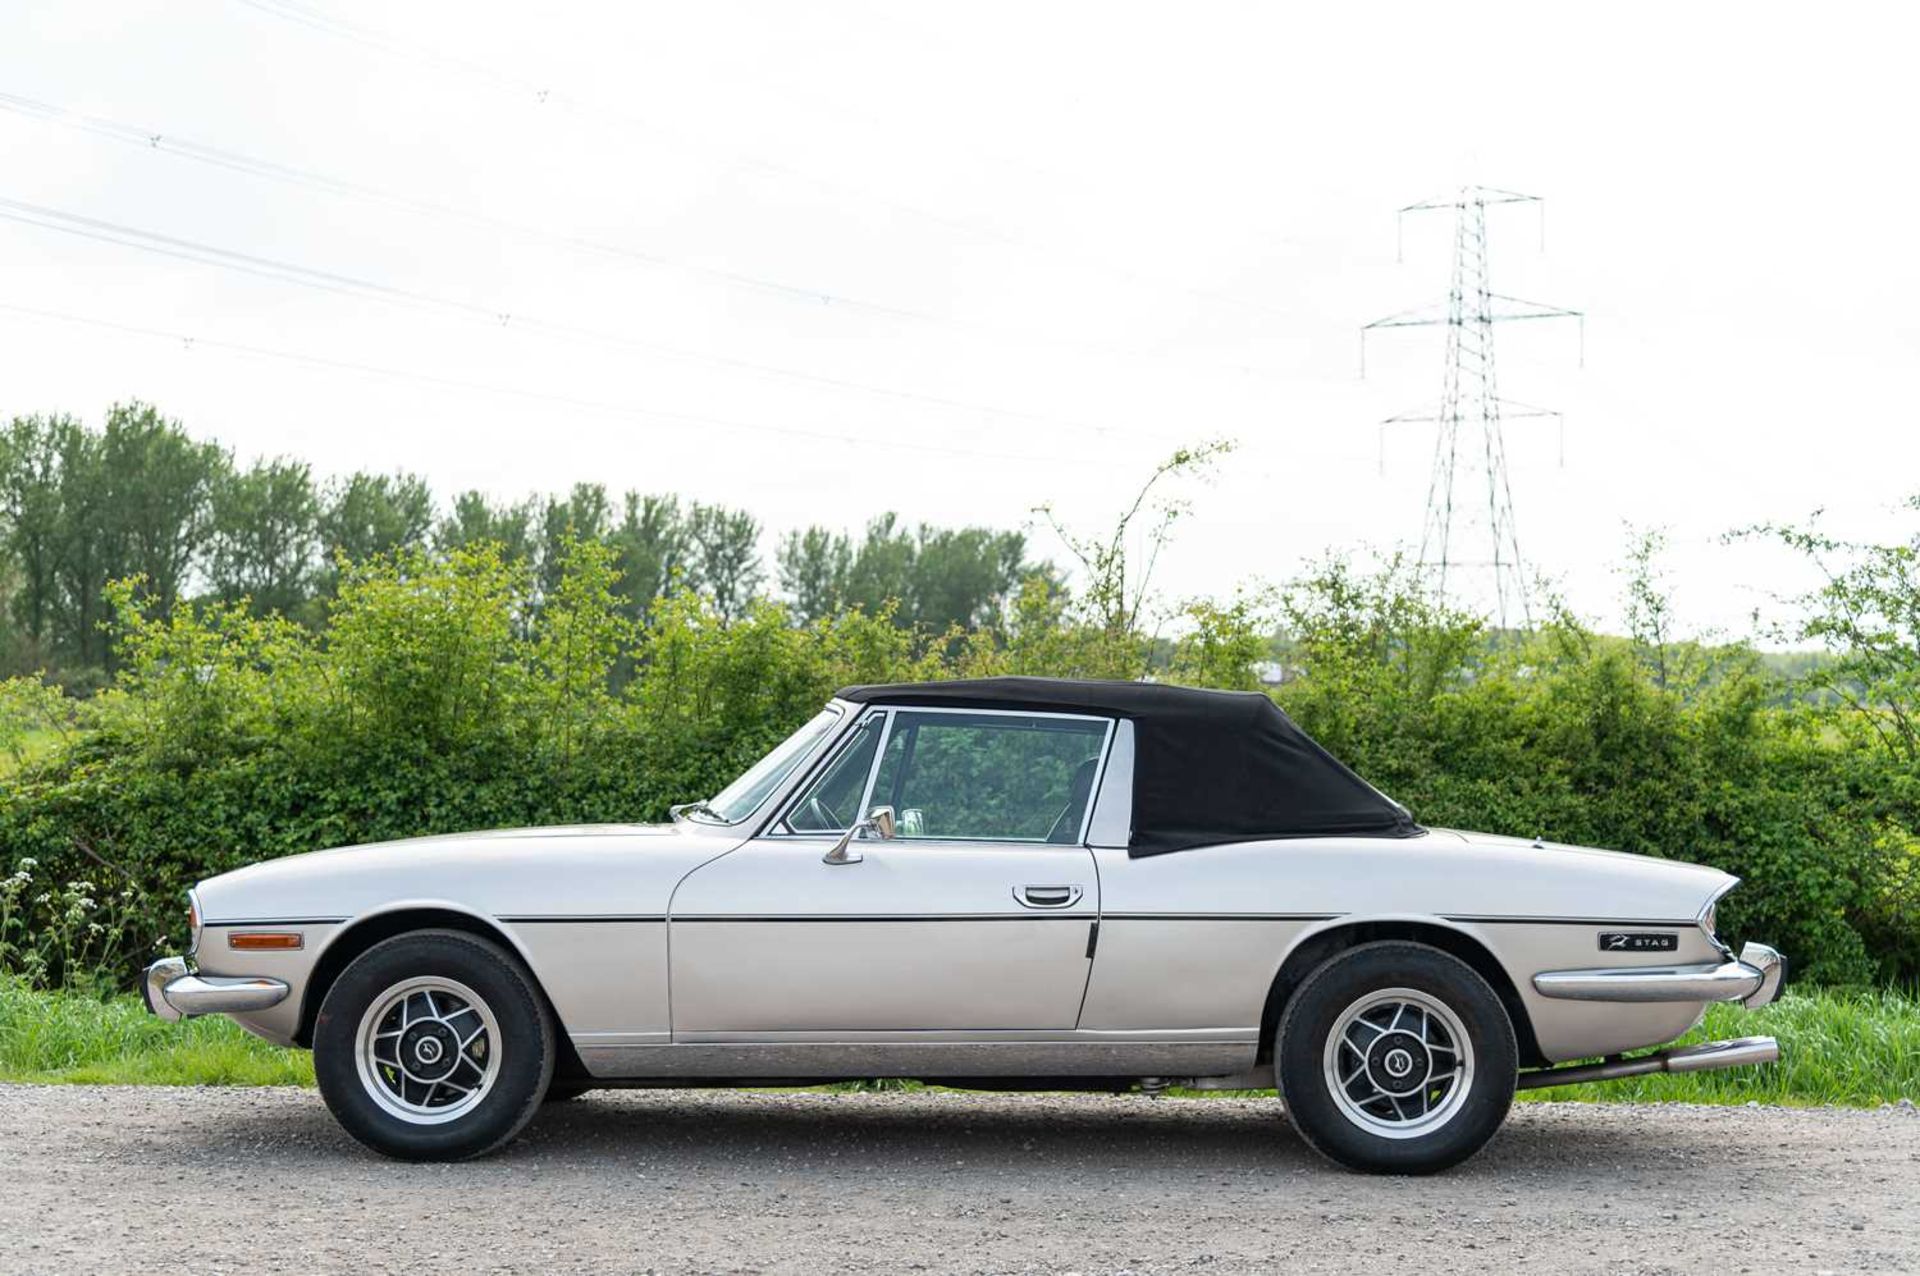 1974 Triumph Stag ***NO RESERVE*** Fully-restored example, equipped with manual overdrive transmissi - Image 10 of 83